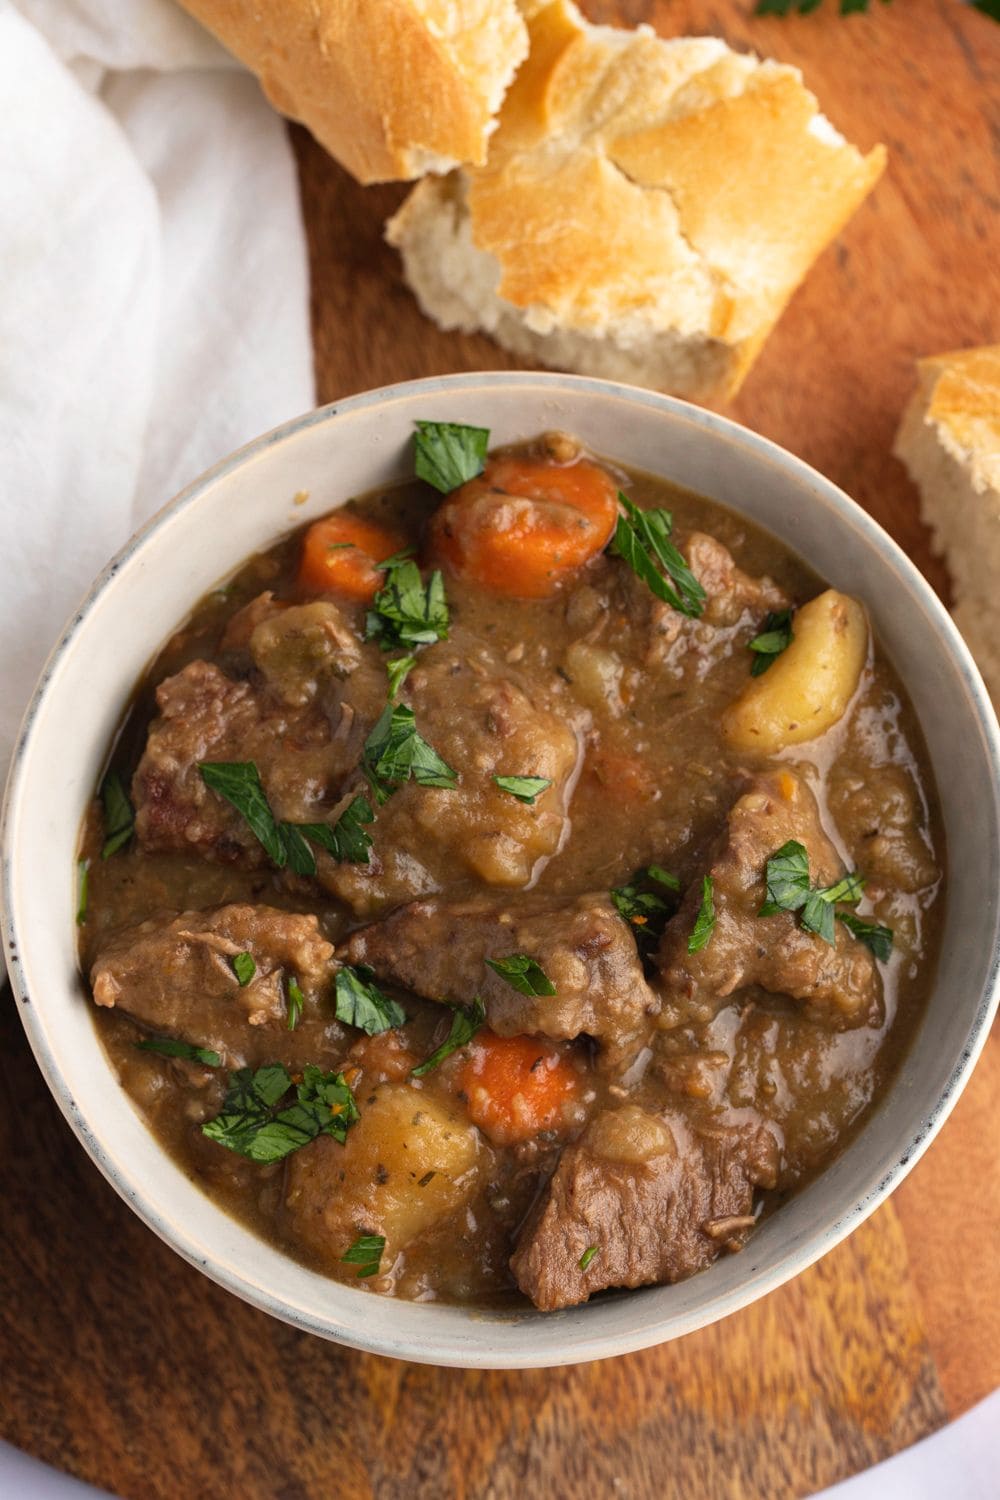 Comforting Beef Stew with Vegetables and Bread